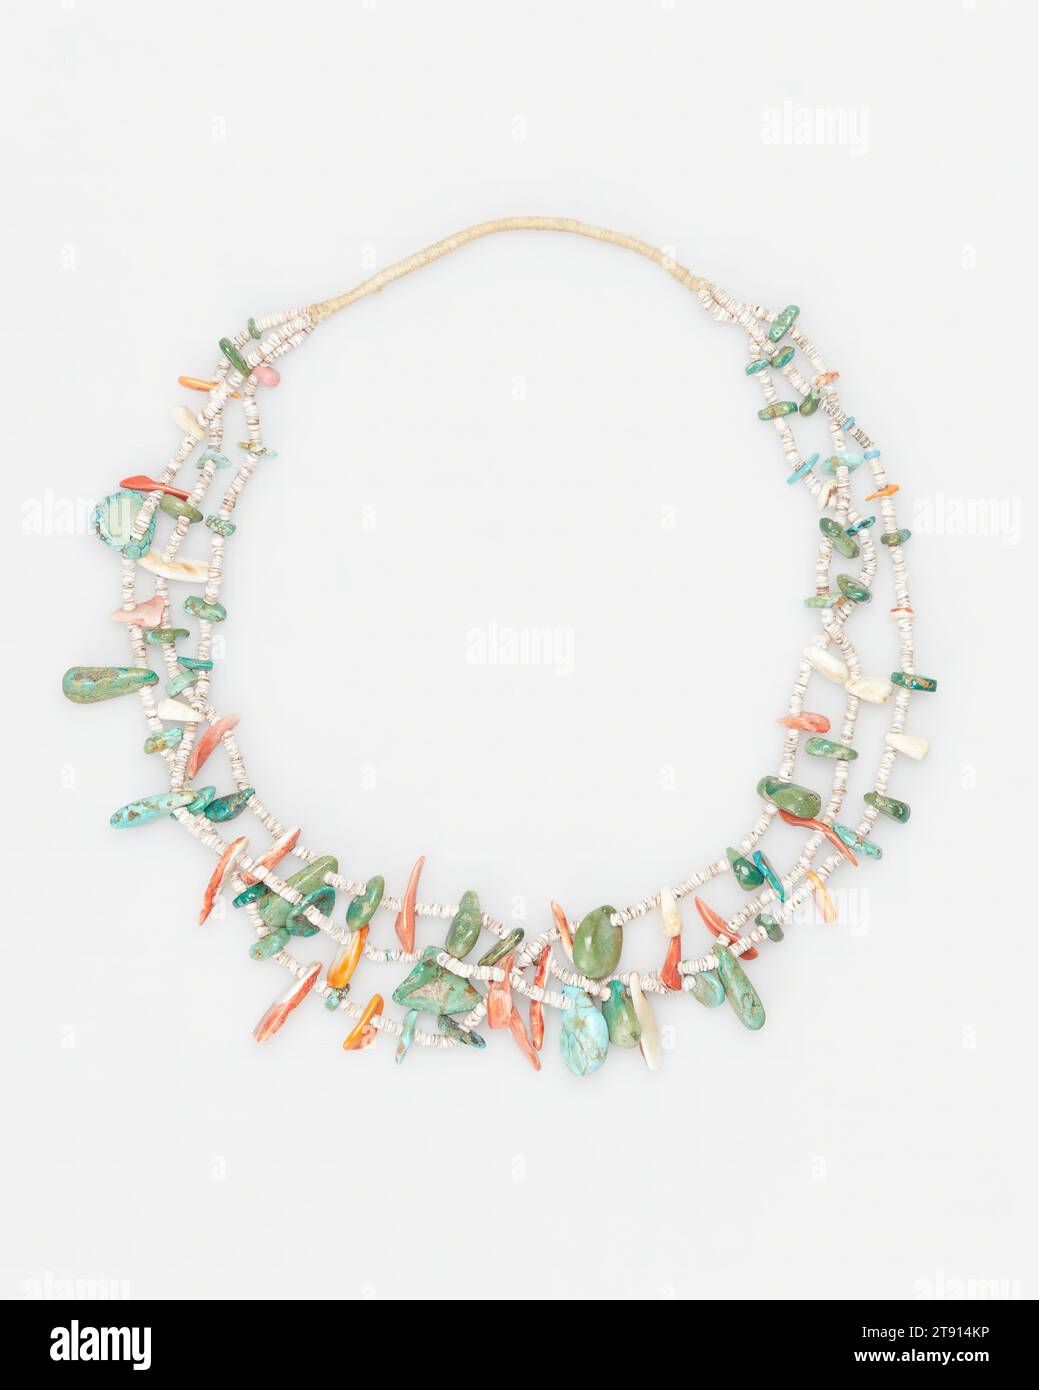 Necklace, 20th century, 14 1/4 in. (36.2 cm), Silver, turquoise,abalone, heishi, United States, 20th century Stock Photo